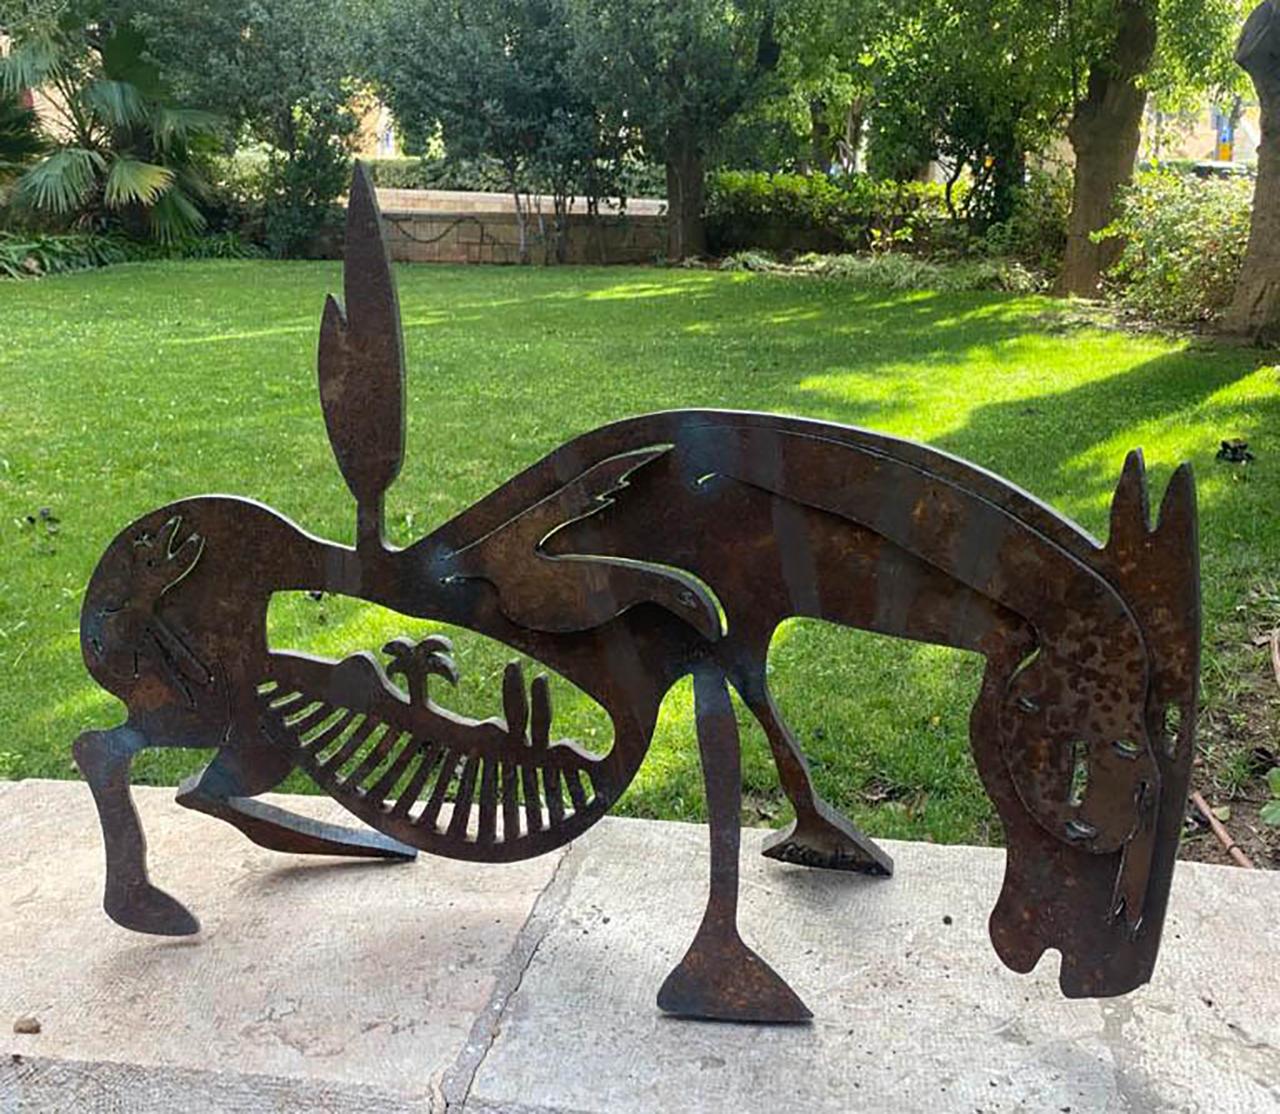 A very impressive iron sculpture by famous Israeli Painter, Menashe Kadishman. Homeland is considered a very important theme in the artist's work.